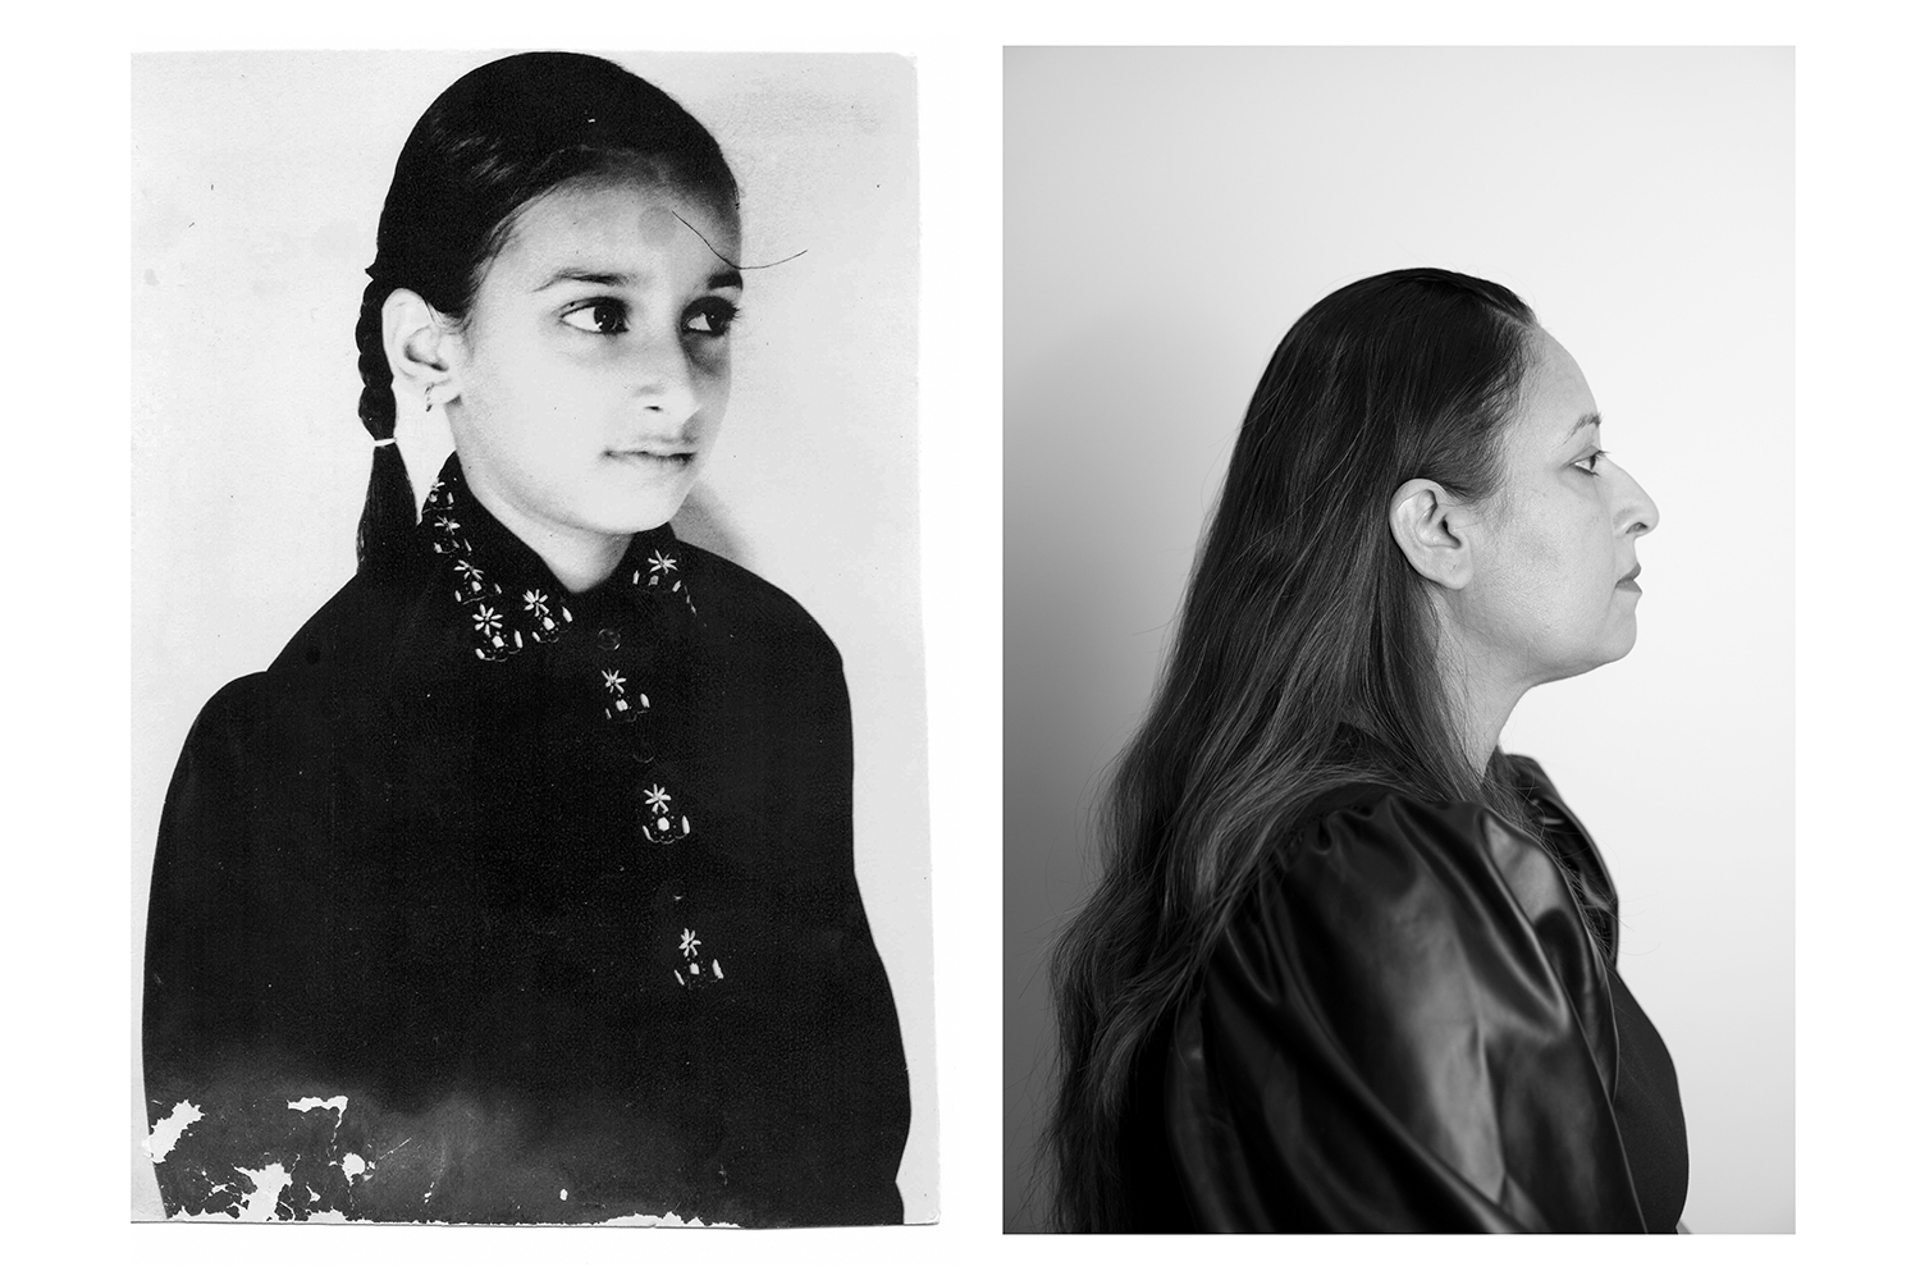 This photo consists of a diptych containing an old and recent photograph of the same woman. The photo on left is of a young girl, whose hair is braided into two as she wears an black collared shirt with embroidered flowers on the collar. The photo on the right is of an older woman, facing to the right looking ahead. She is wearing a shiny black blouse and has long black hair.